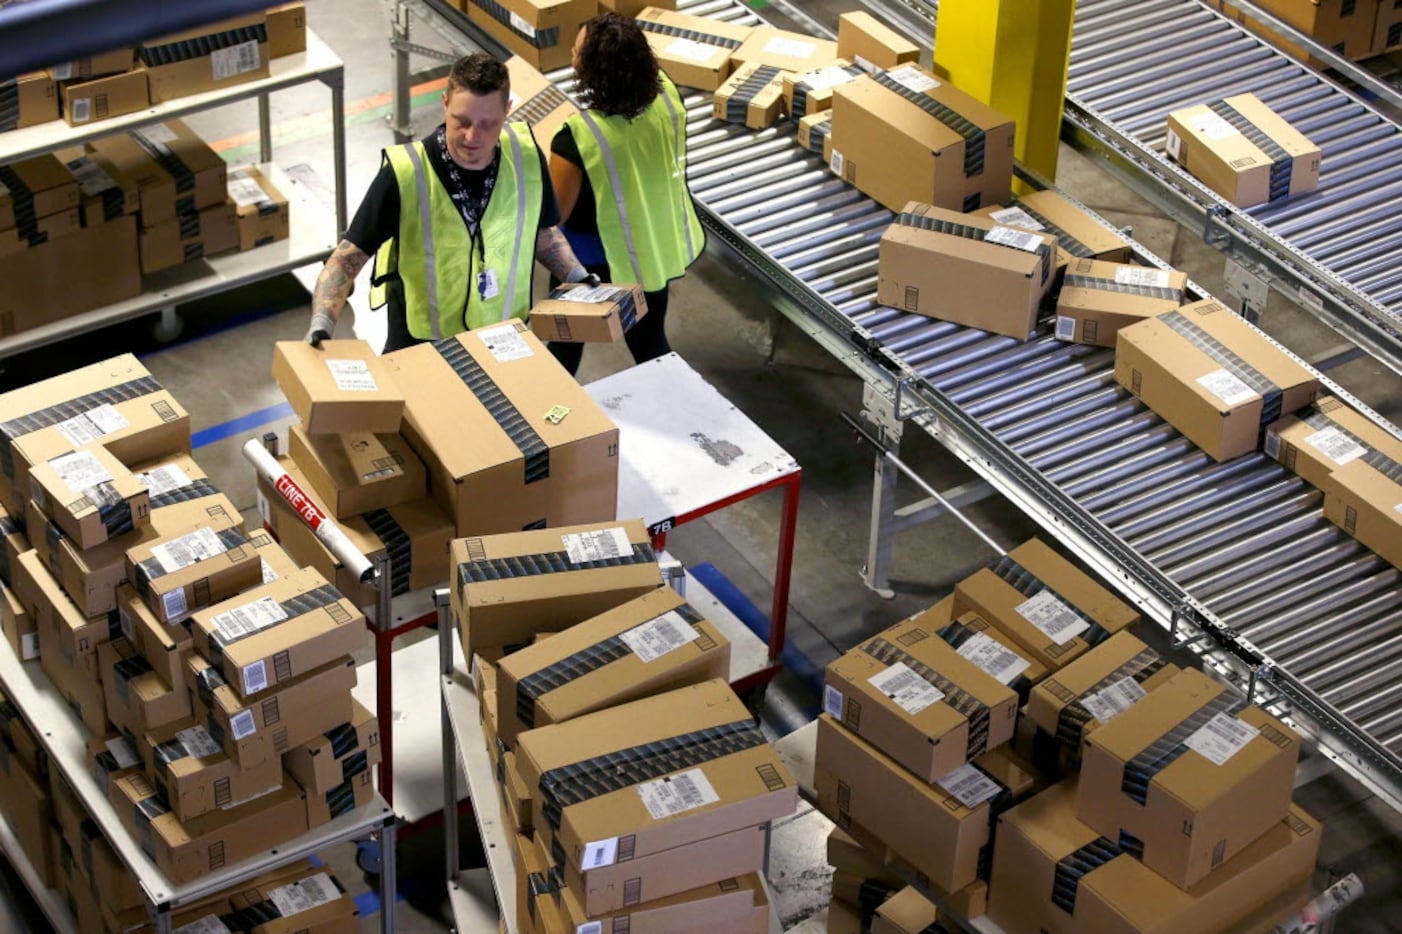 Amazon employees organize outbound packages at a fulfillment center in Phoenix.